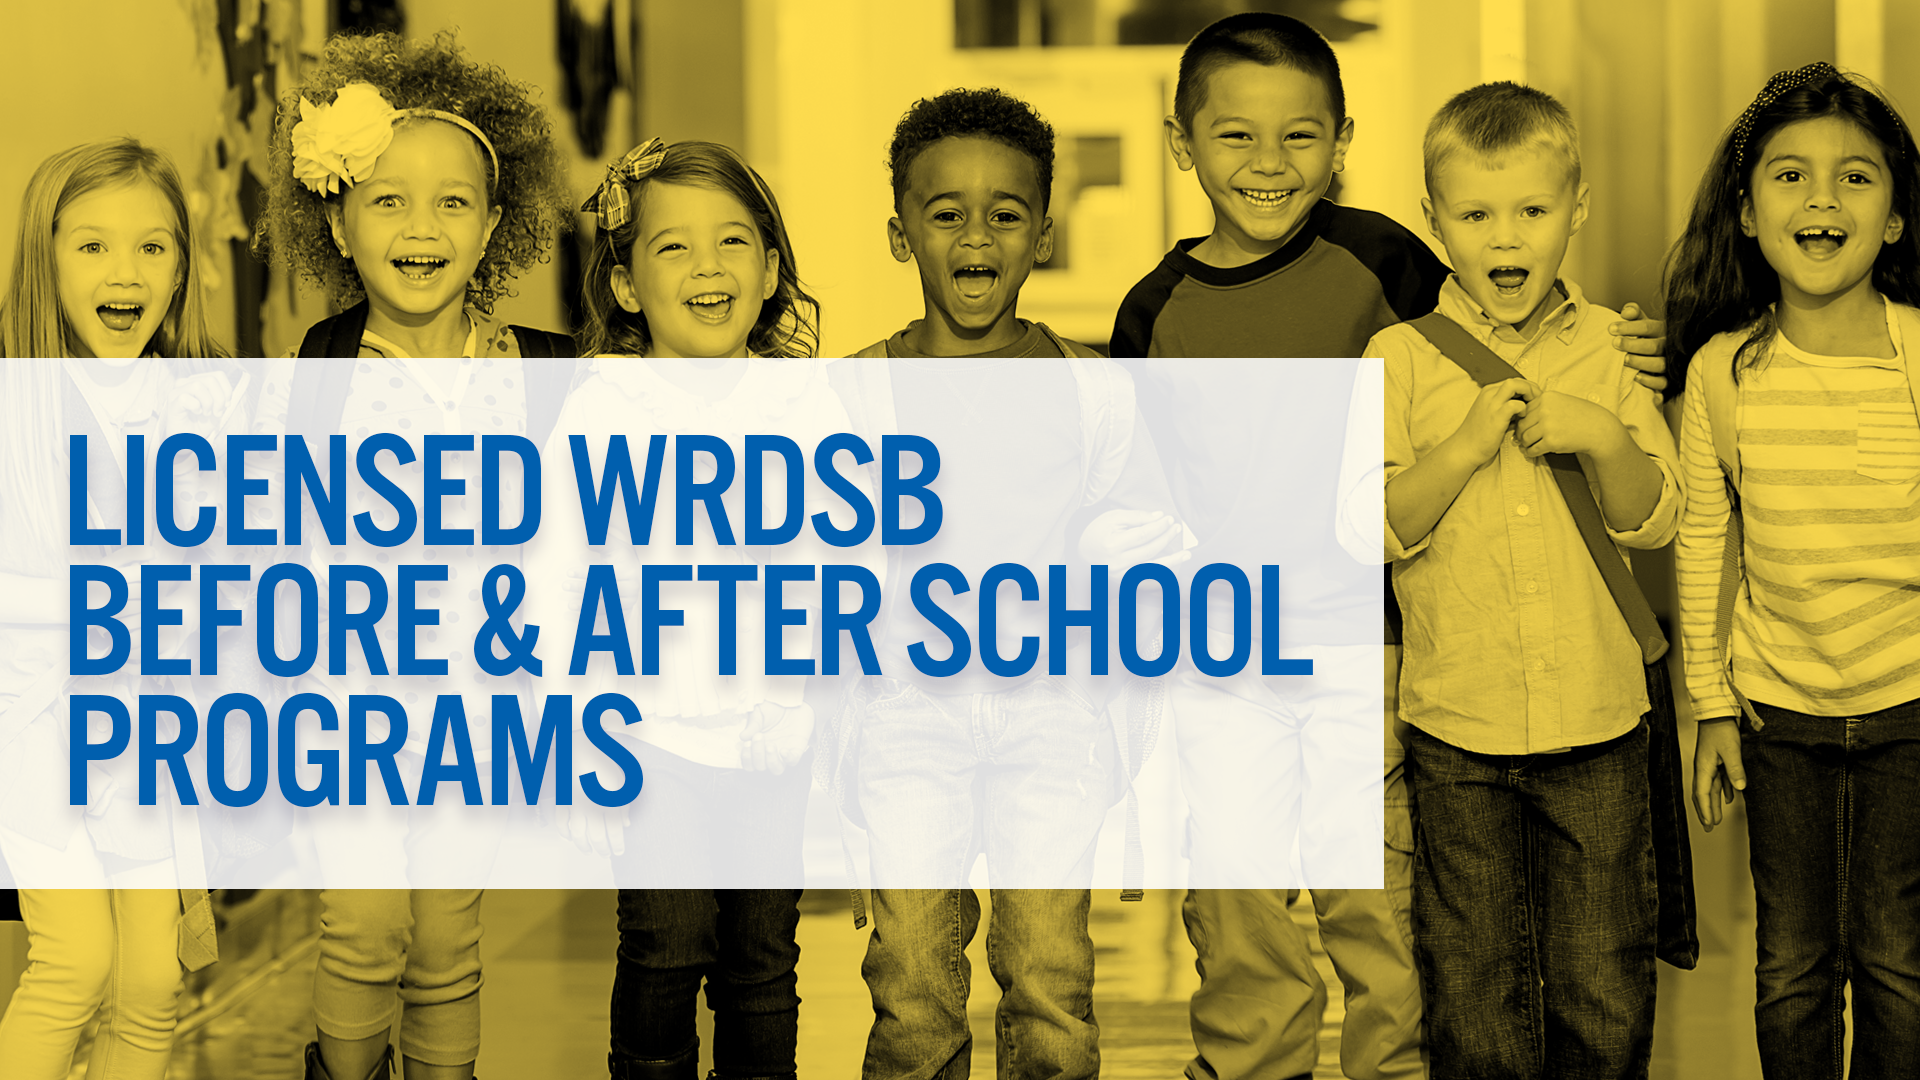 Licensed WRDSB Before & After School Programs